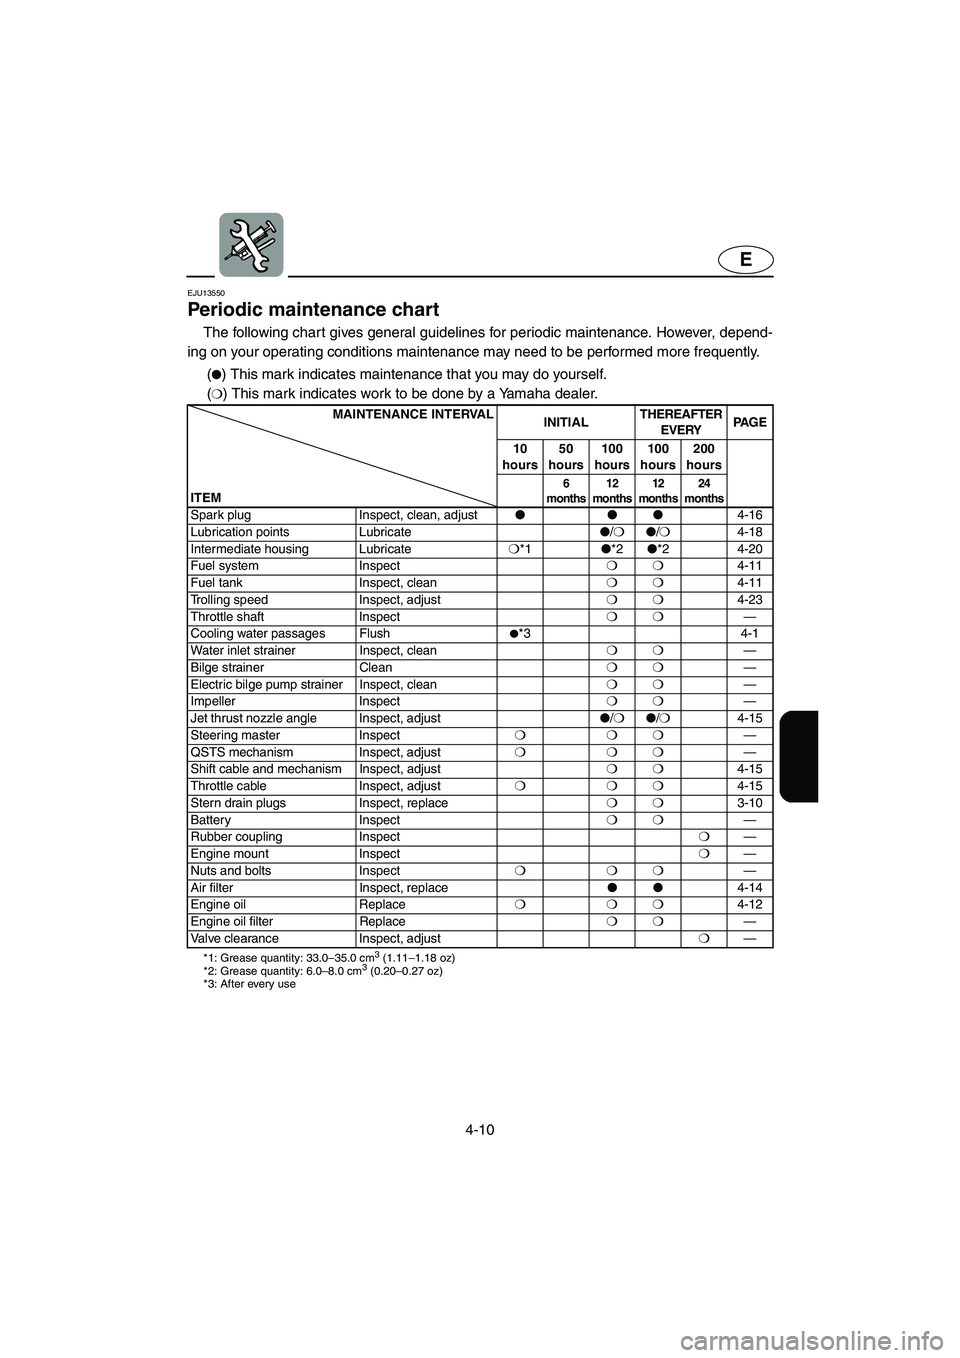 YAMAHA FX HO CRUISER 2006  Owners Manual 4-10
E
EJU13550 
Periodic maintenance chart 
The following chart gives general guidelines for periodic maintenance. However, depend-
ing on your operating conditions maintenance may need to be perform